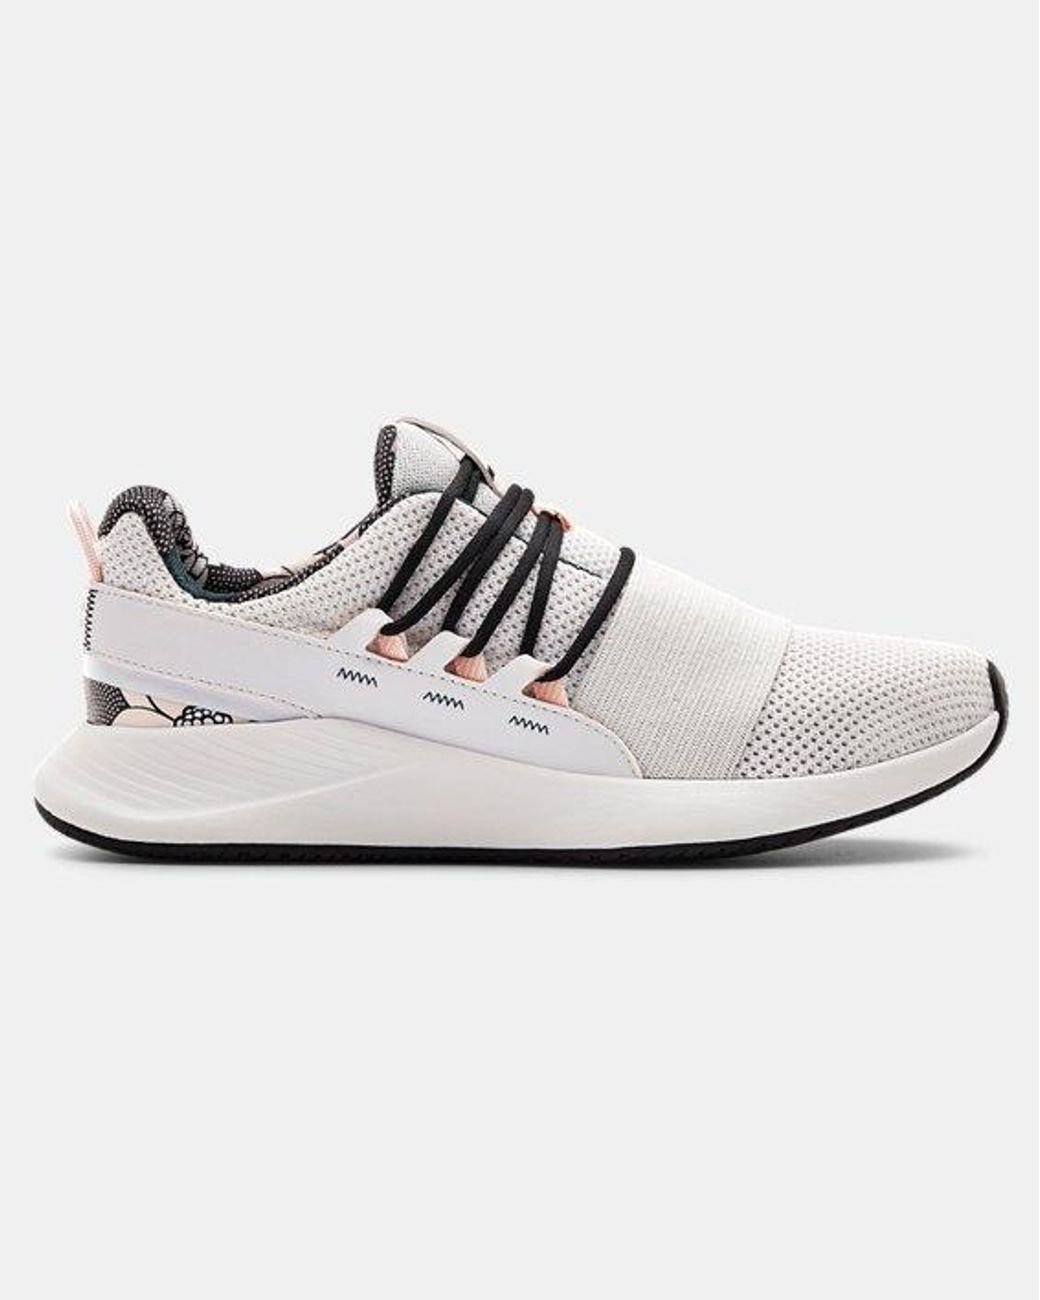 Under Armour Ua Charged Breathe Print Sportstyle Shoes in White | Lyst